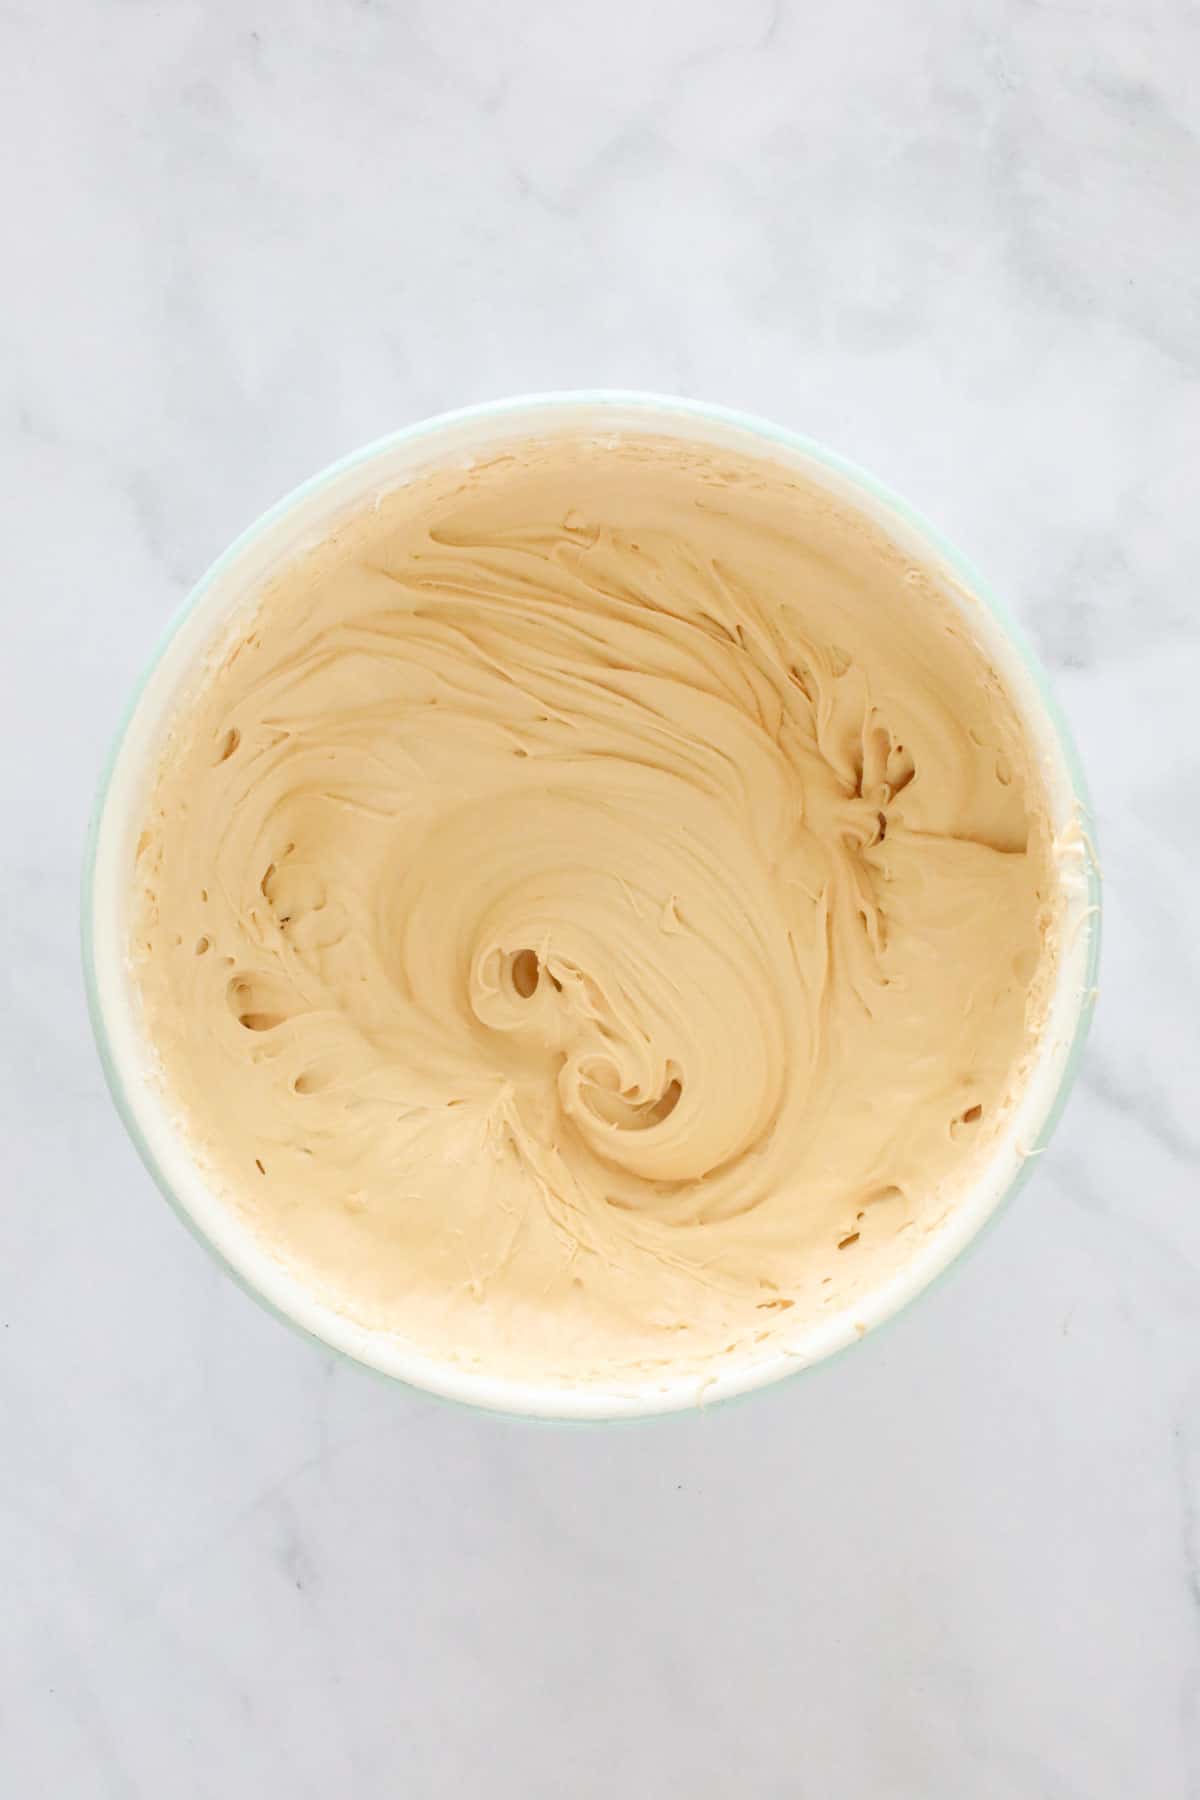 Caramel whipped cream in a bowl.